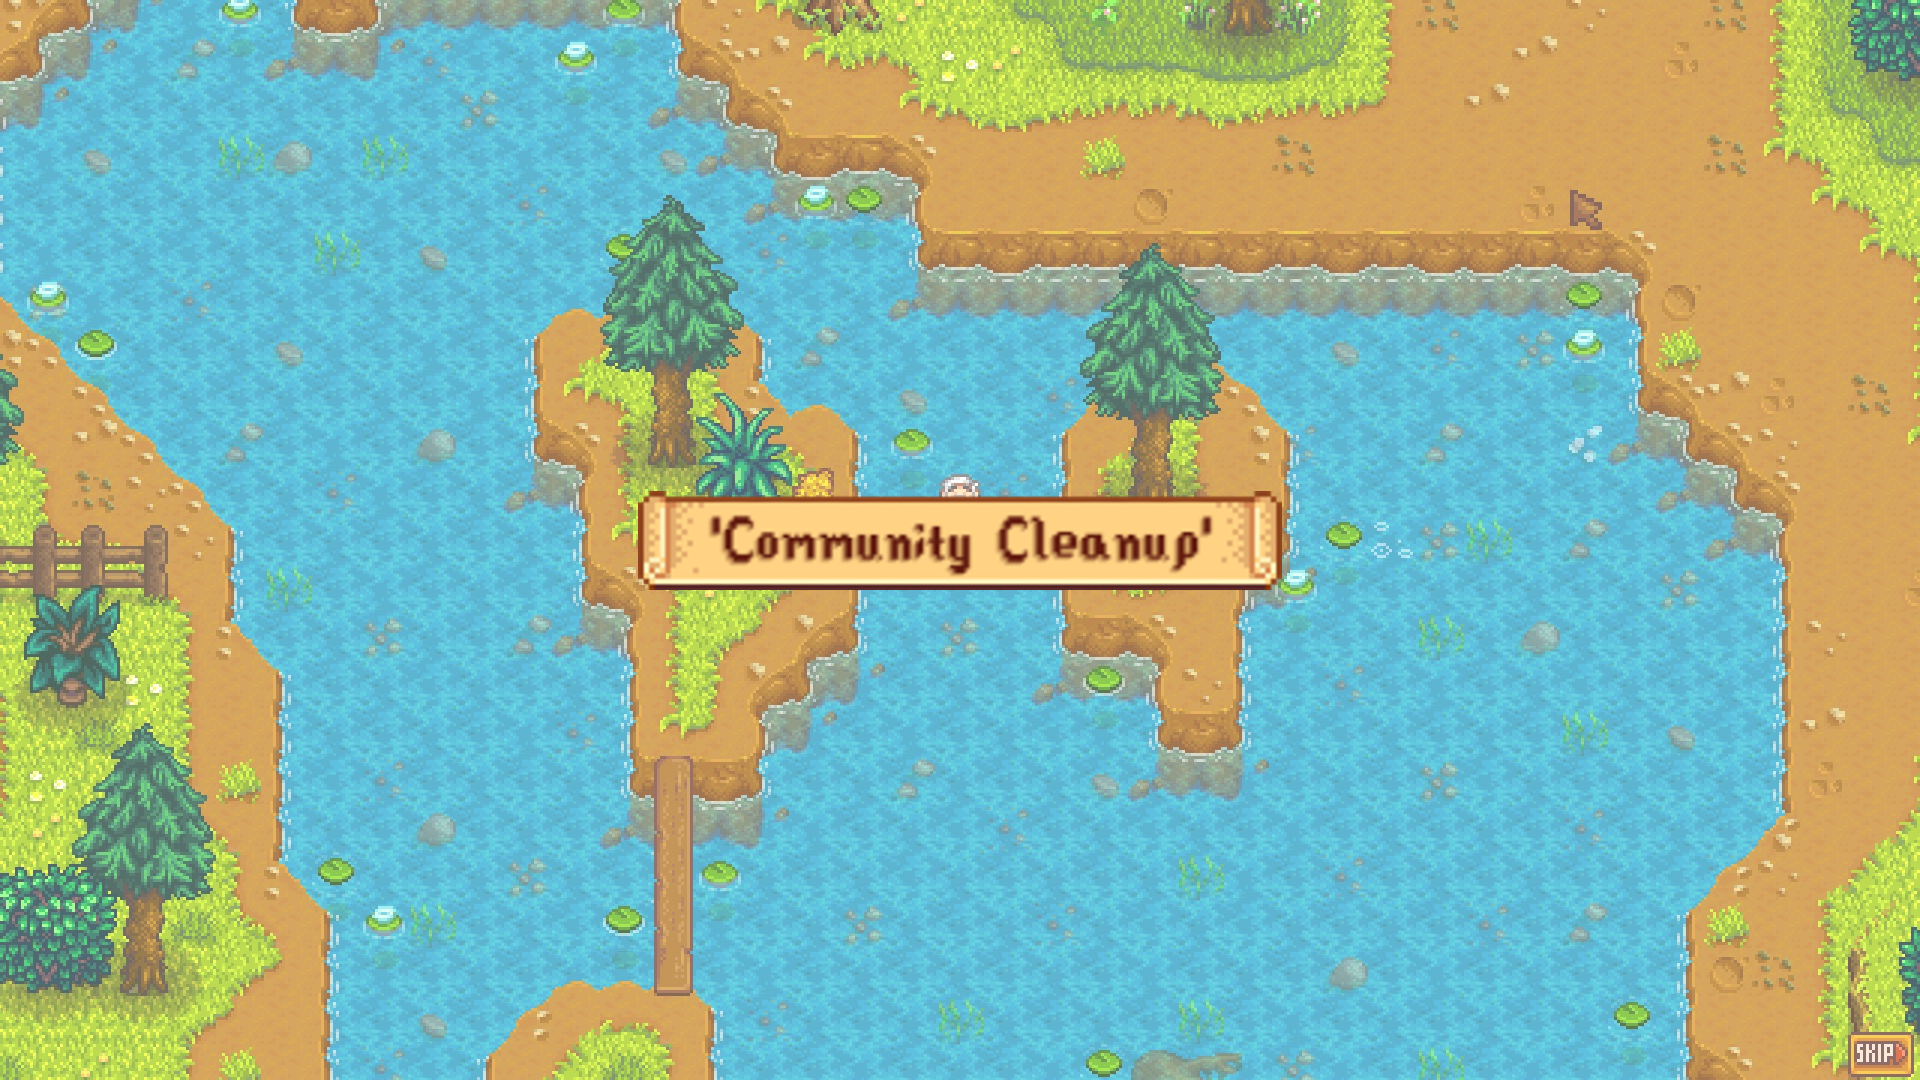 How to Complete the Community Cleanup Quest in Stardew Valley